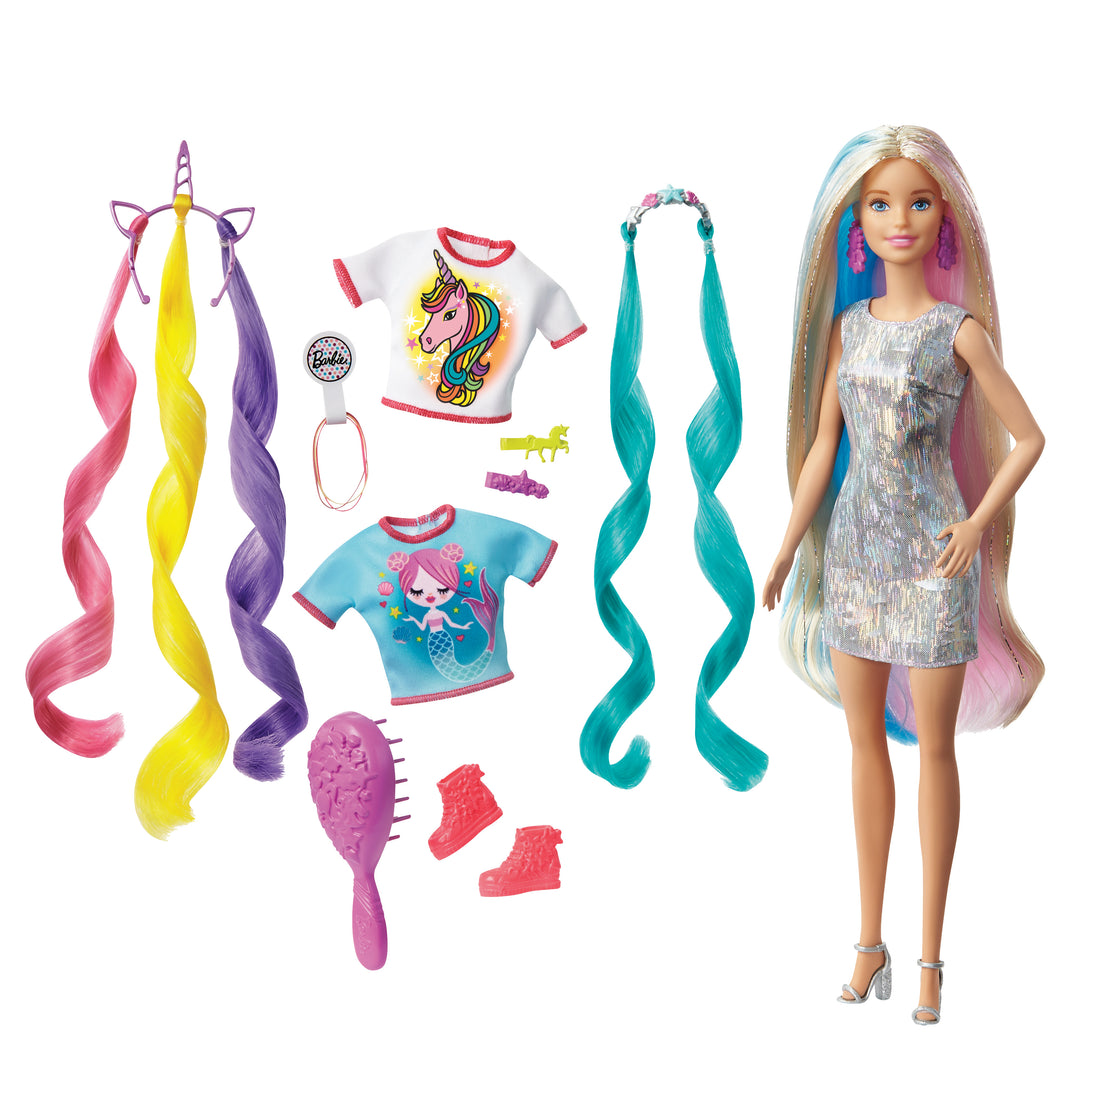 Barbie Fantasy Hair Doll - Dolls and Accessories